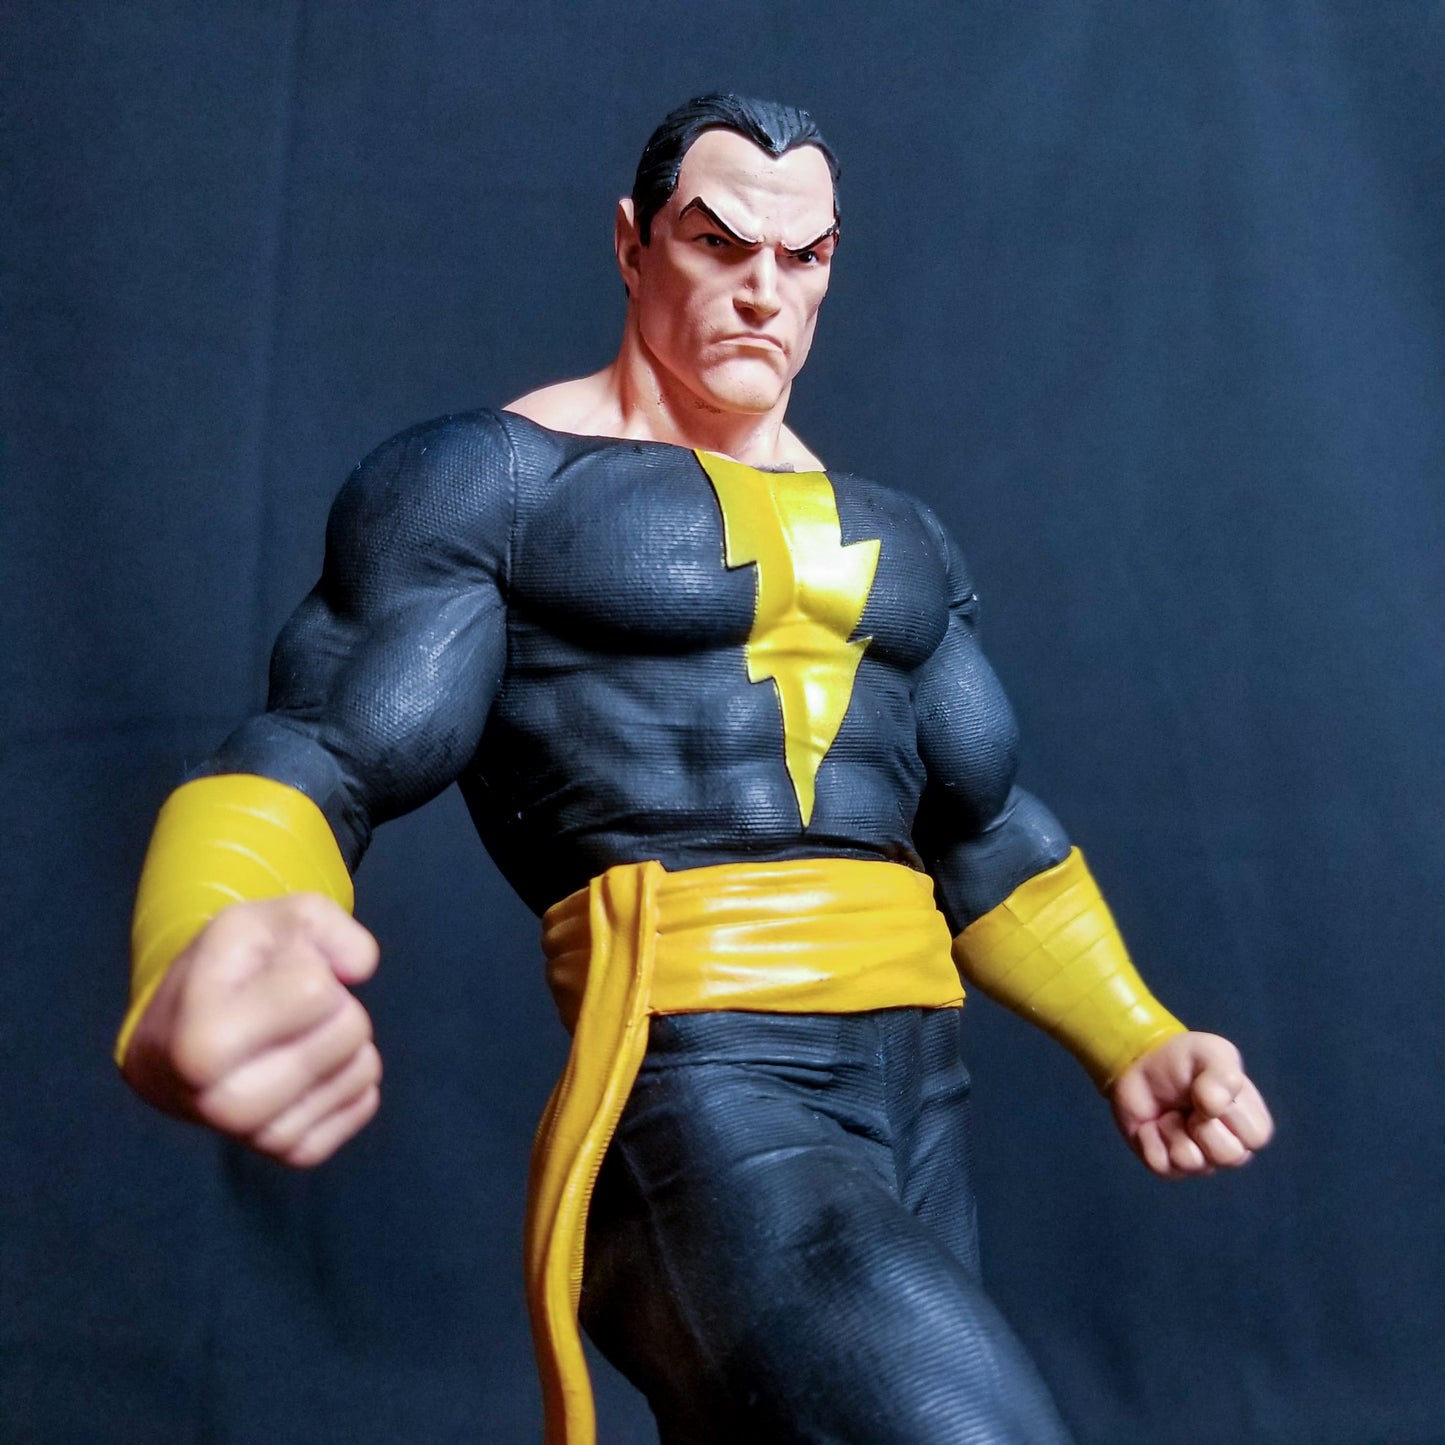 Load image into Gallery viewer, Getting ready for his big-screen debut, Black Adam smashes his way out of the Shazam/Captain Marvel mythos and into the DC Gallery Diorama line of sculptures! Hovering above the ground with lightning crackling around him, this approximately 11-inch sculpture of Teth-Adam features a removable cape, and is made of high-quality PVC with detailed sculpting and paint applications.
